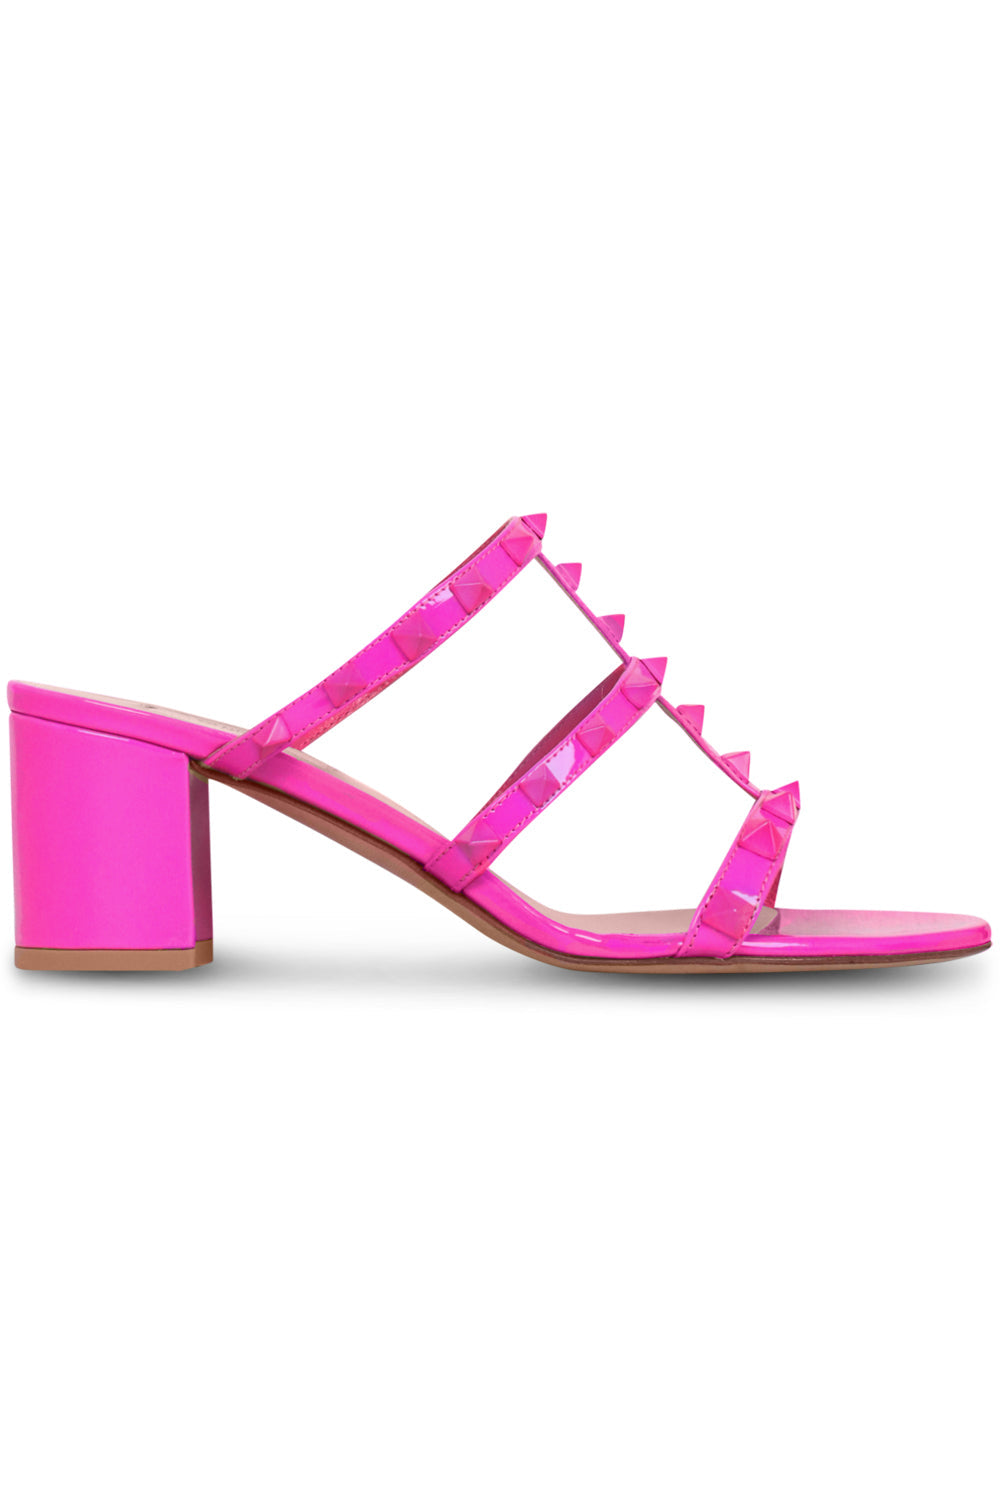 VALENTINO SHOES ROCKSTUD THREE STRAP PATENT 60MM MULE | PINK PP